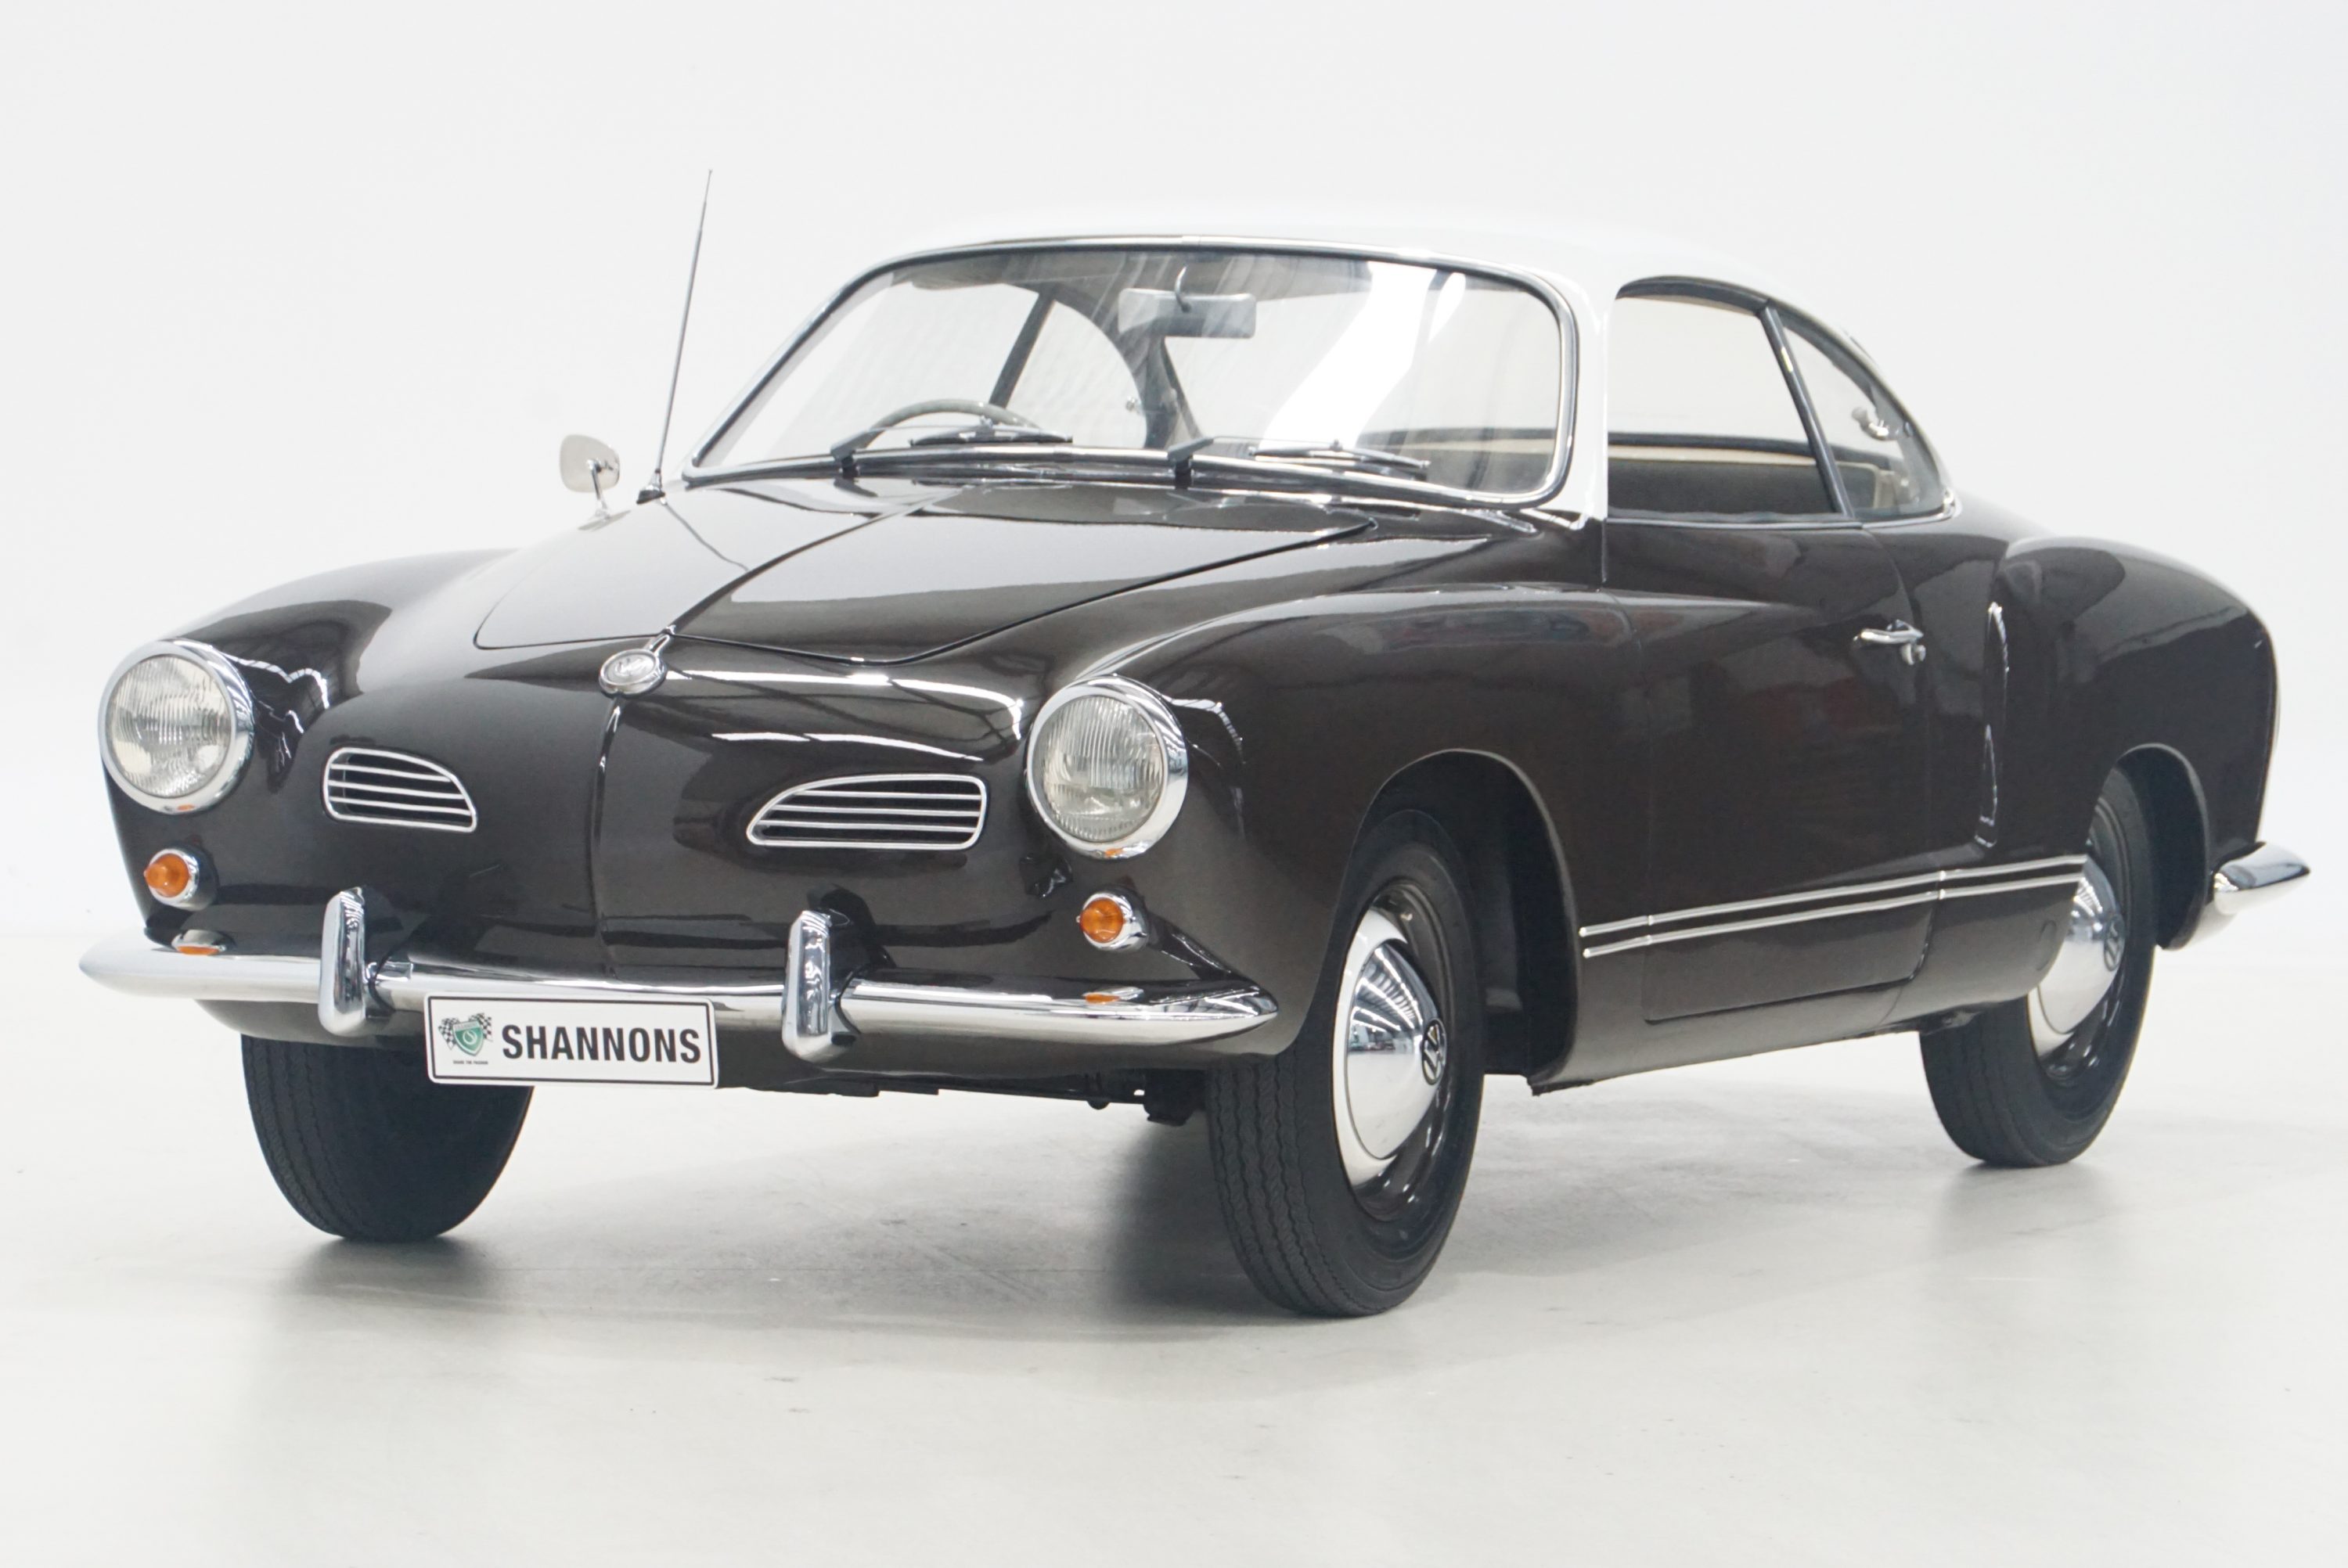 This superbly-restored Australian-delivered 1962 Australian-delivered Type 1 Volkswagen Karmann Ghia Coupe is expected to sell for $50,000-$60,000 in Shannons upcoming Spring Timed Online Auction from August 31 – September 7.